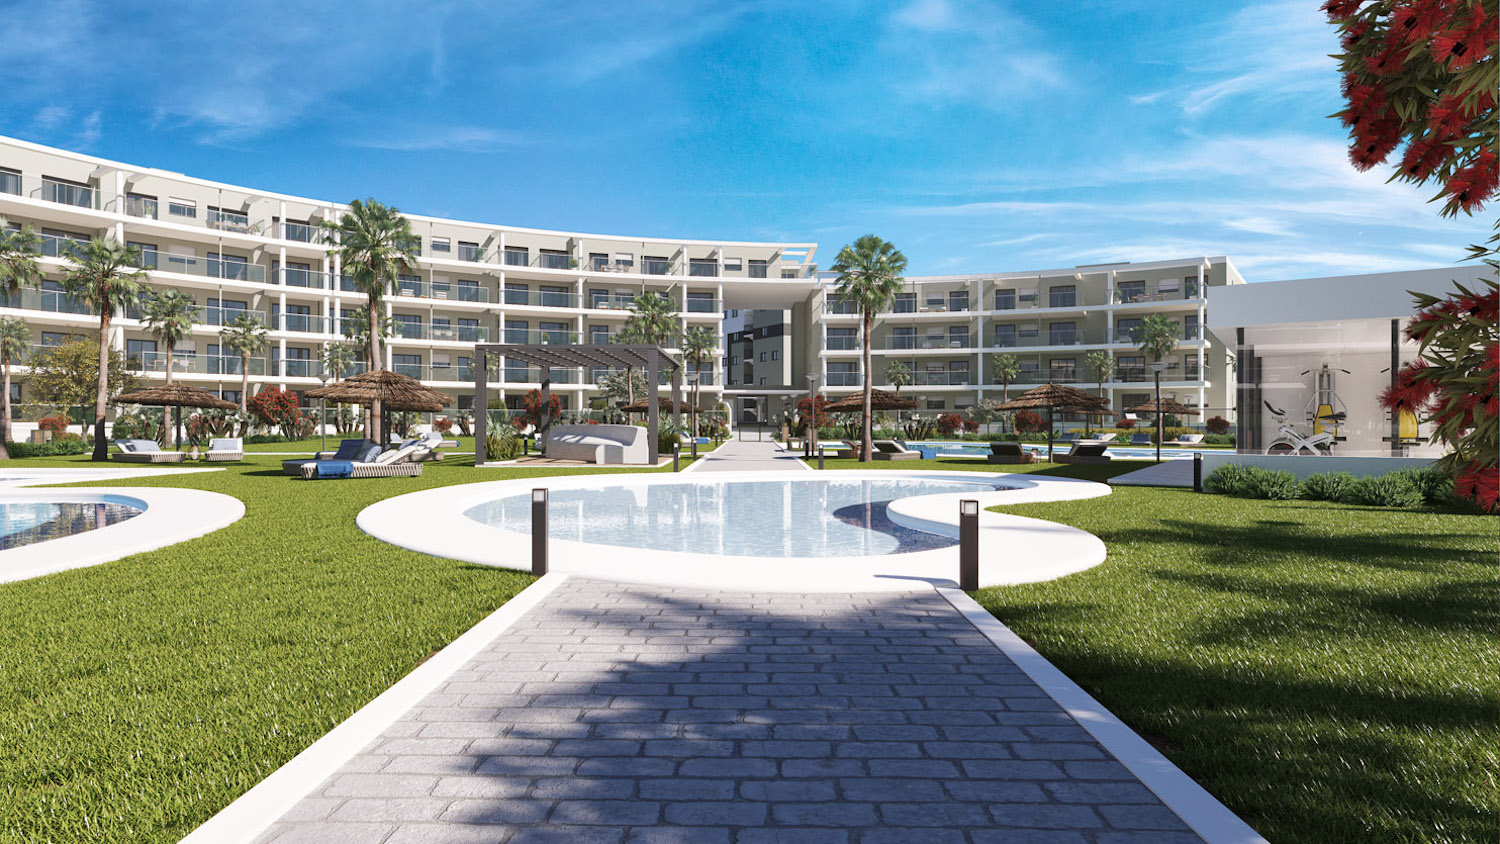 New and modern apartments in Manilva nearby the sea